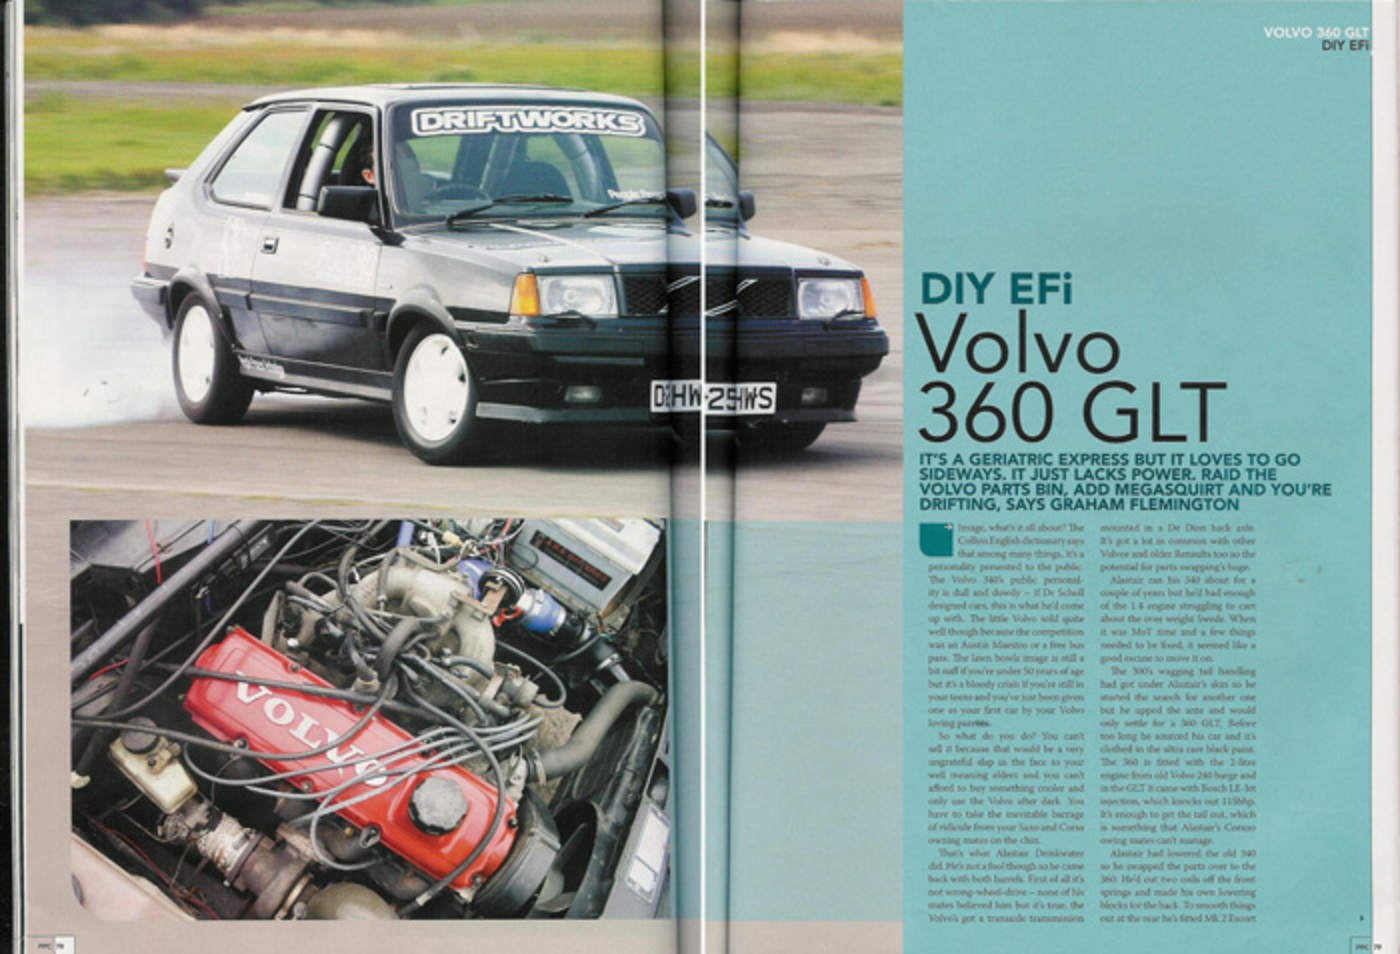 The car is a 1987 Volvo 360glt 3door which I purchased as a standard car in